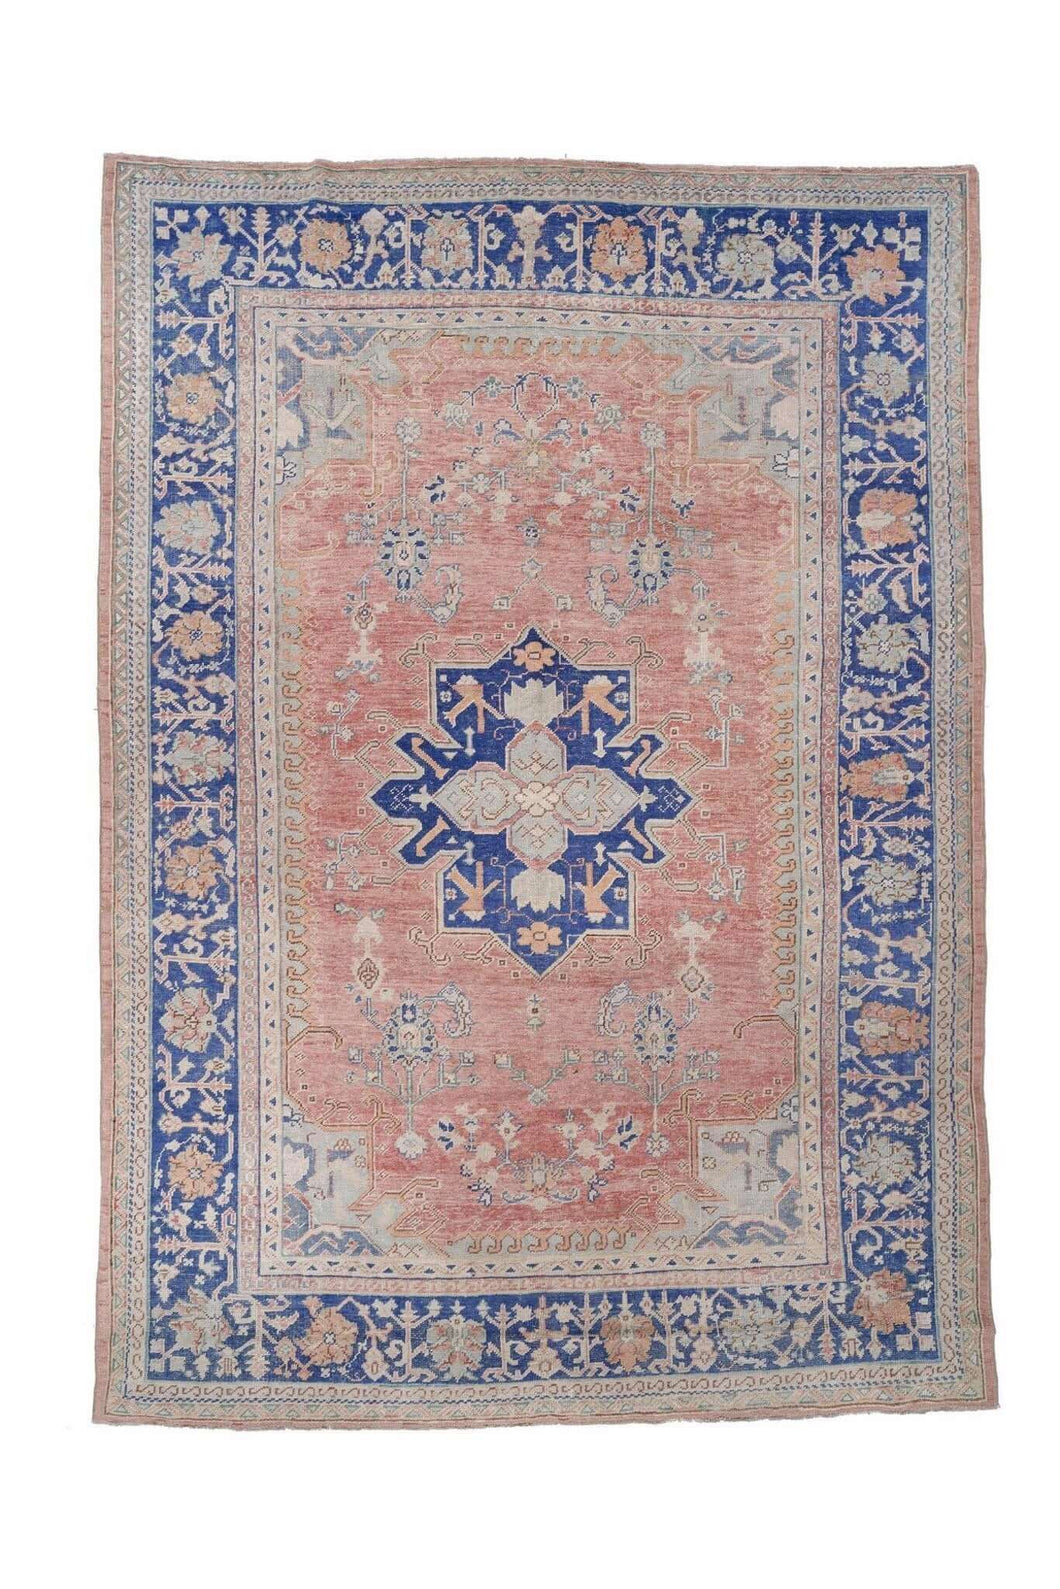 10x14indian Red,blue Colorful Vintage Turkish Area Rug